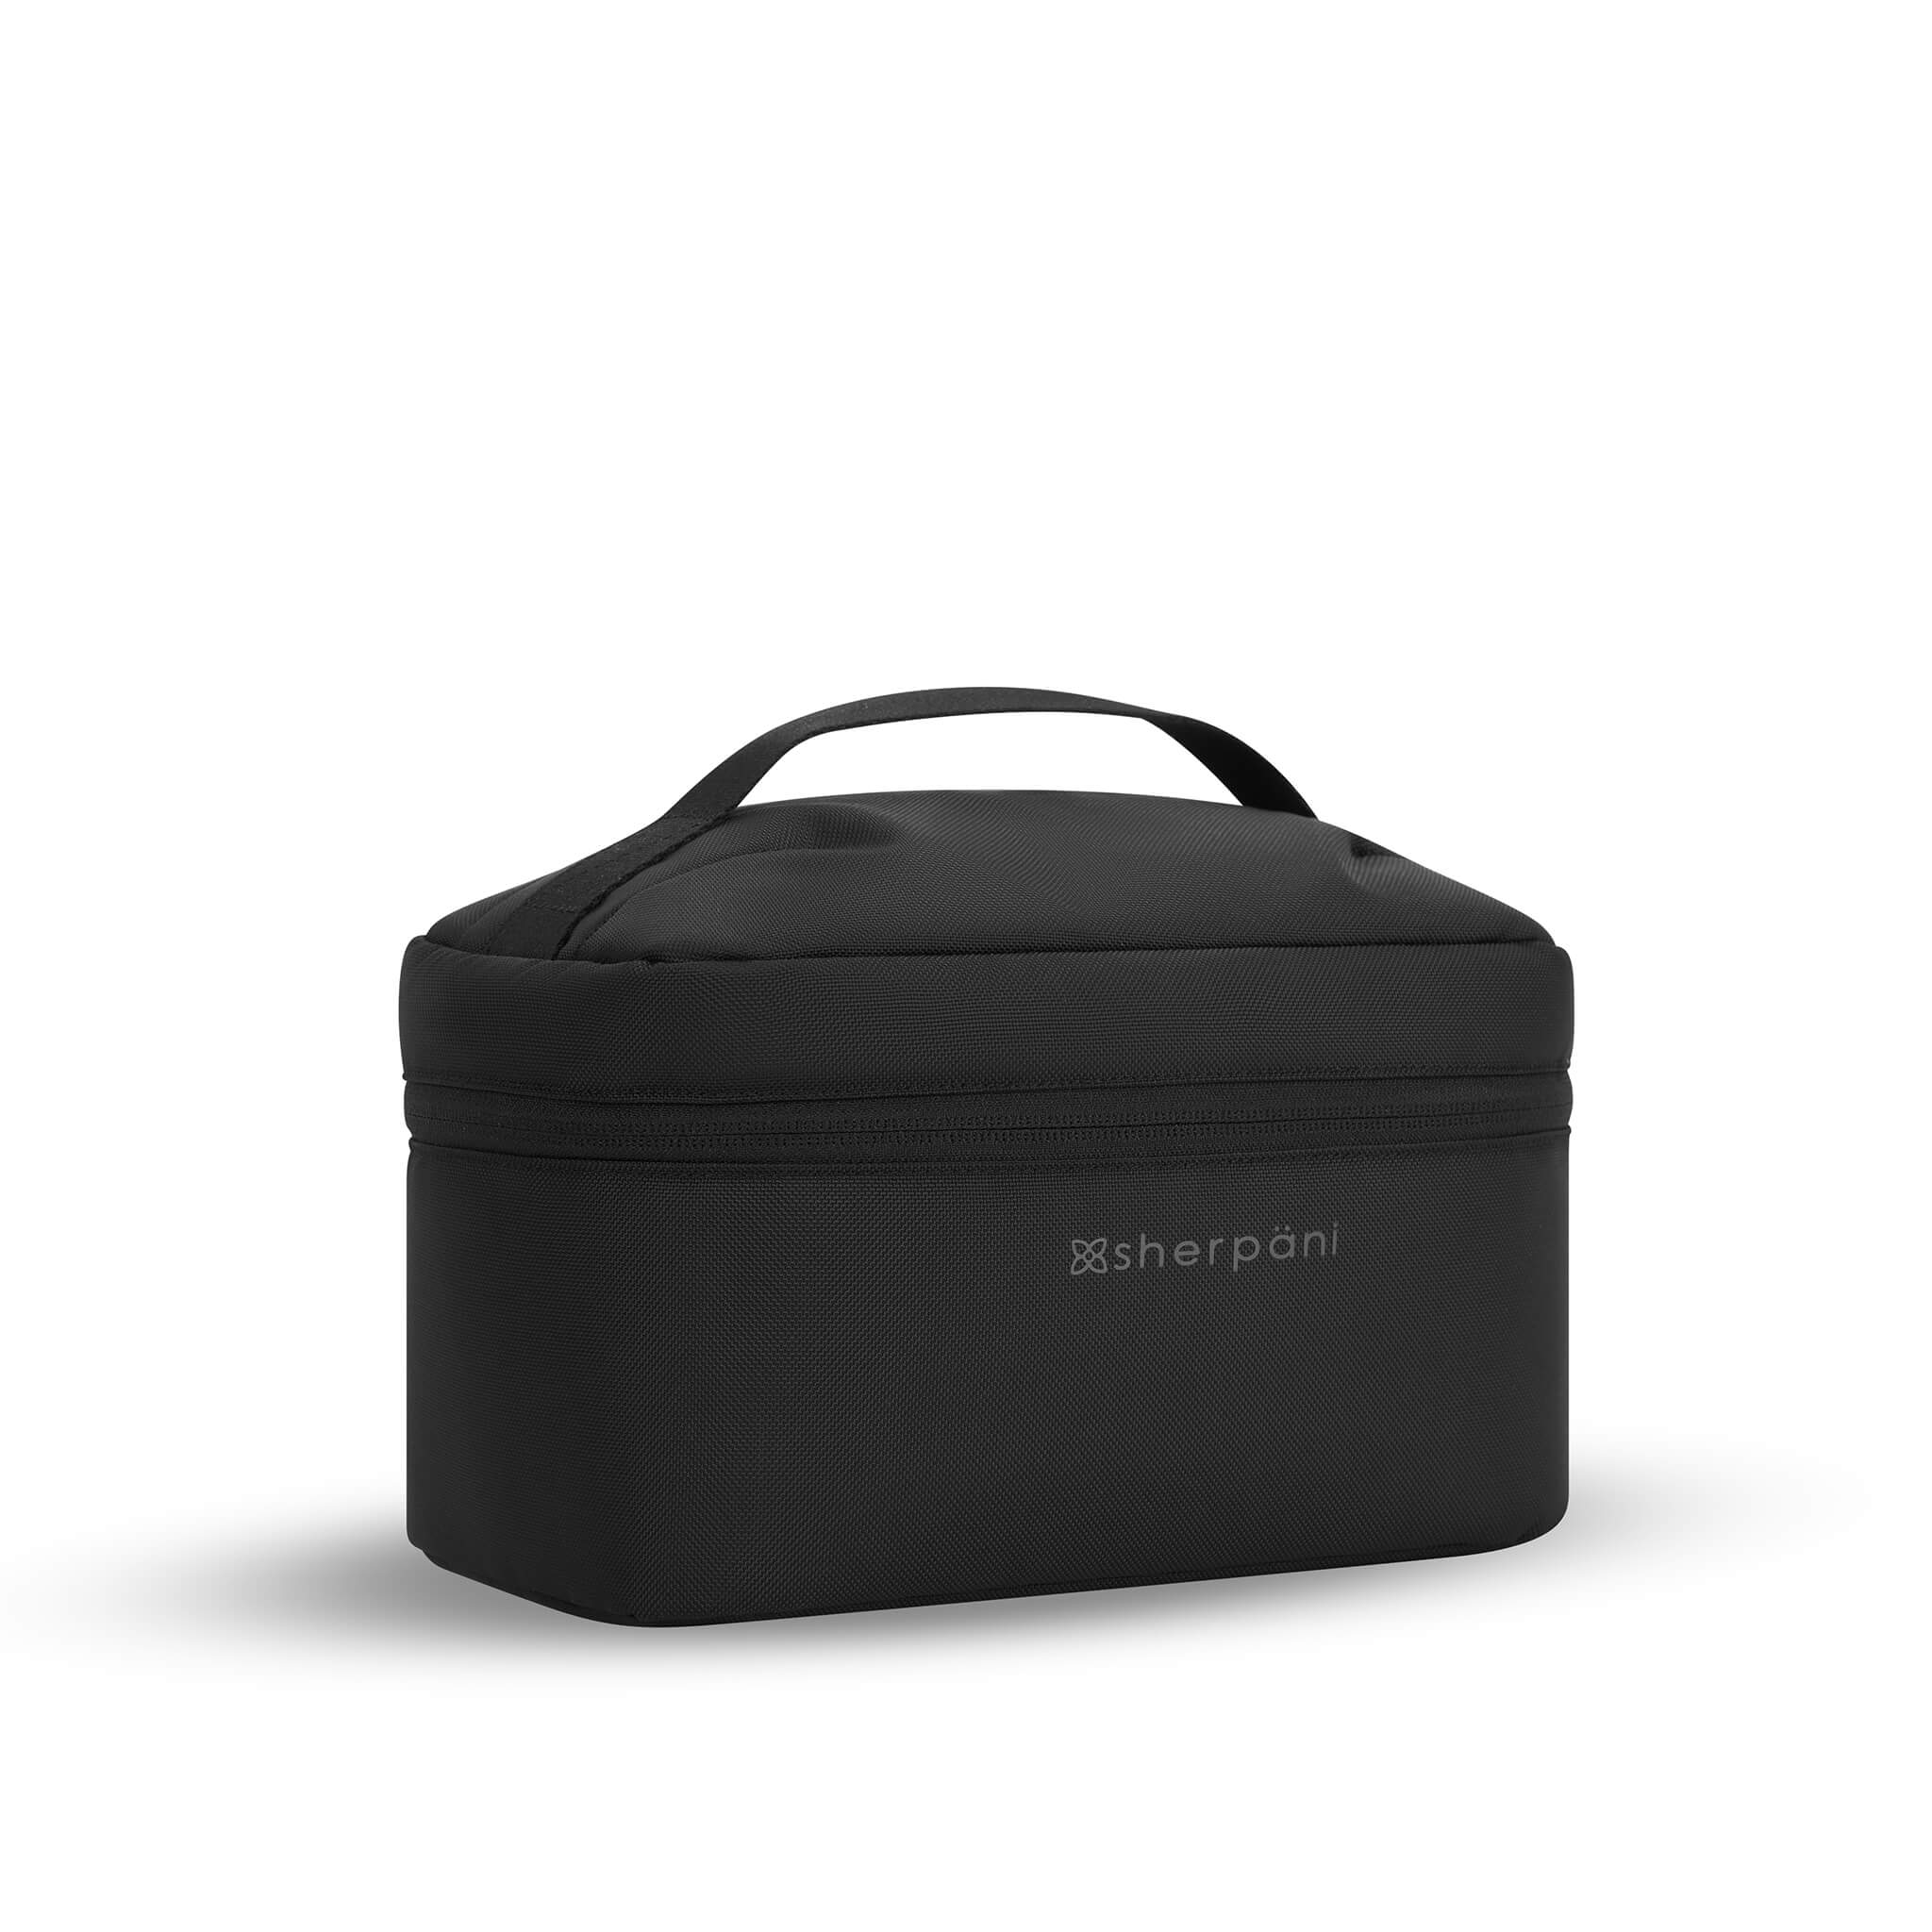 Angled front view of Sherpani travel accessory the Savannah in Carbon. The Savannah is a travel cosmetics case. 